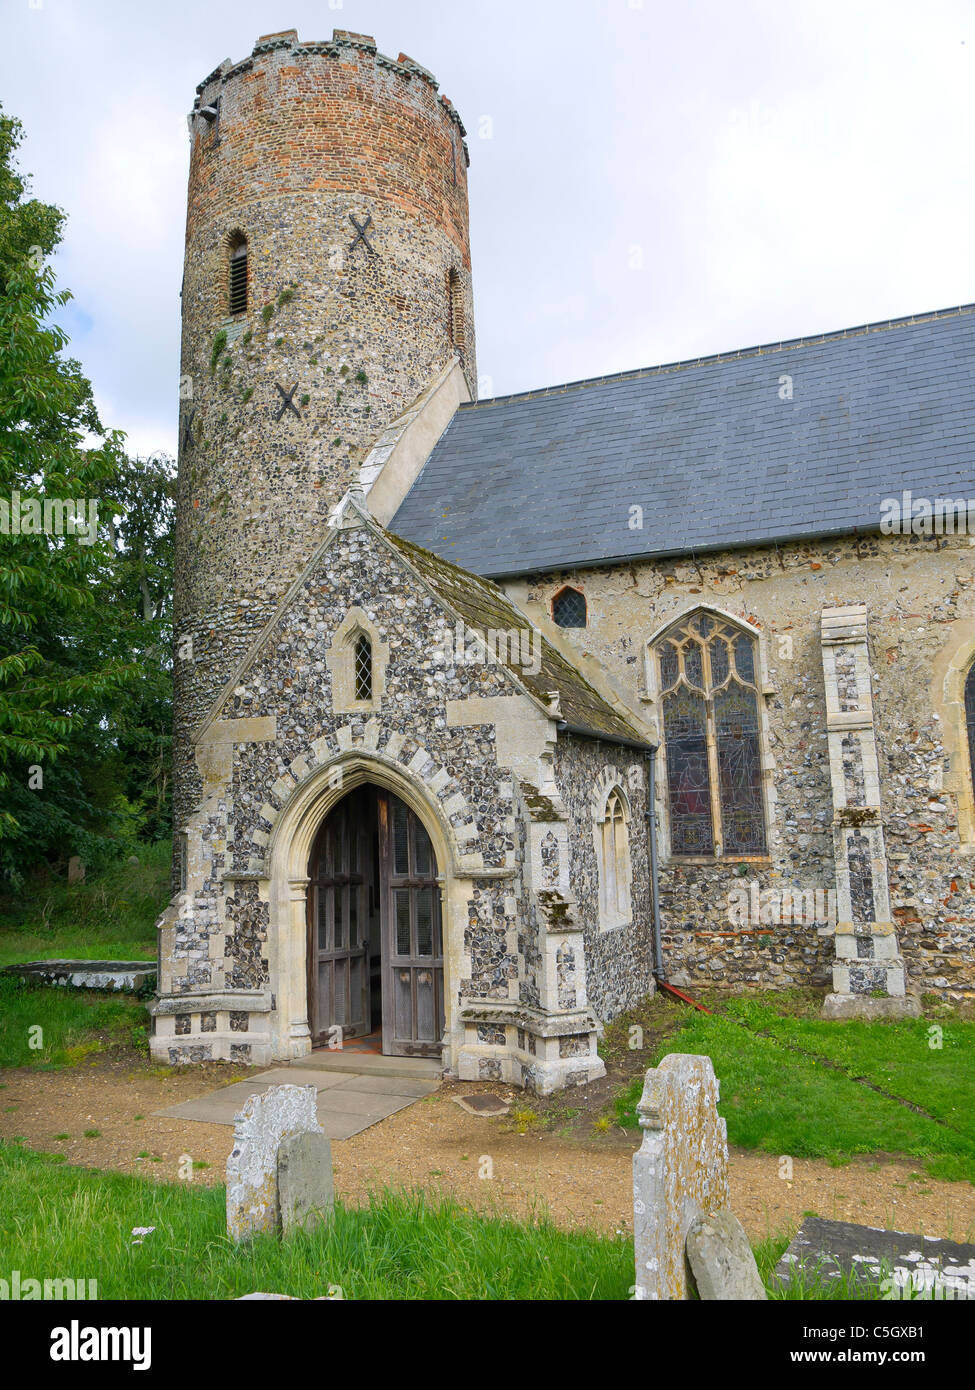 The church of St Peter and St Paul Burgh Castle Norfolk Stock Photo